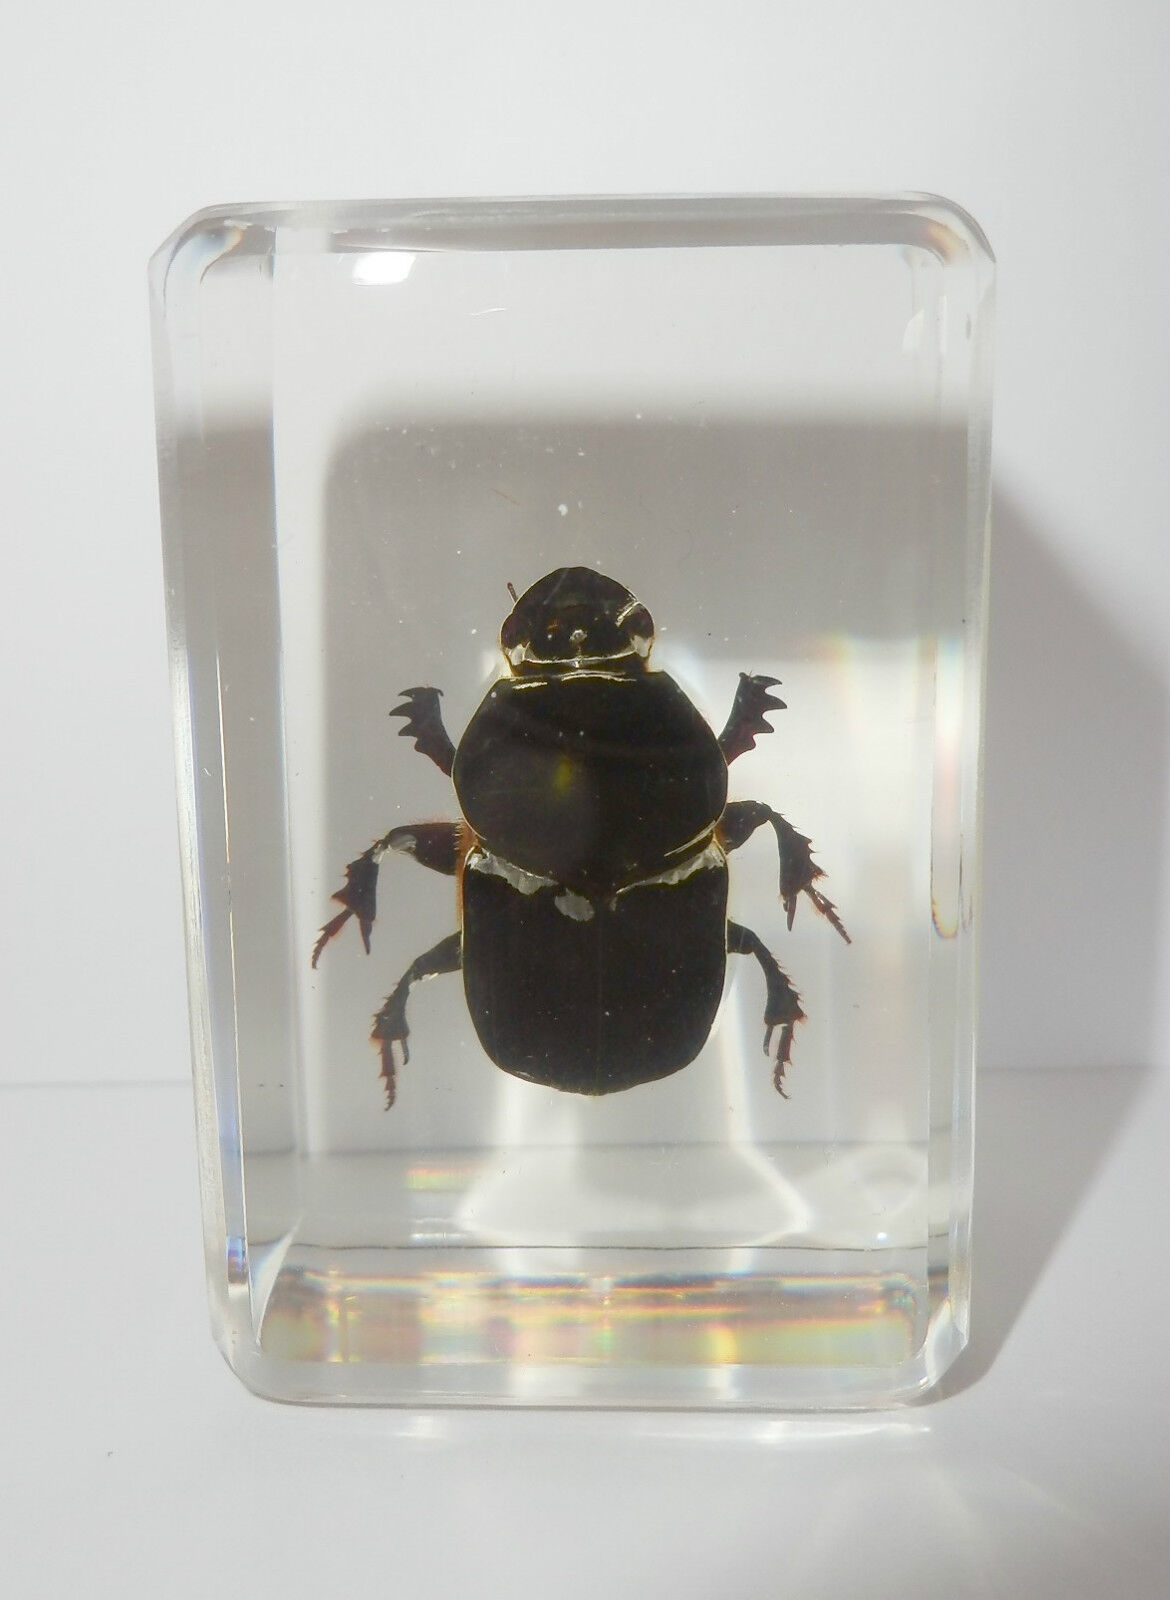 Scarab Dung Beetle Gymnopleurus sp. in Small Block  Education Insect Specimen